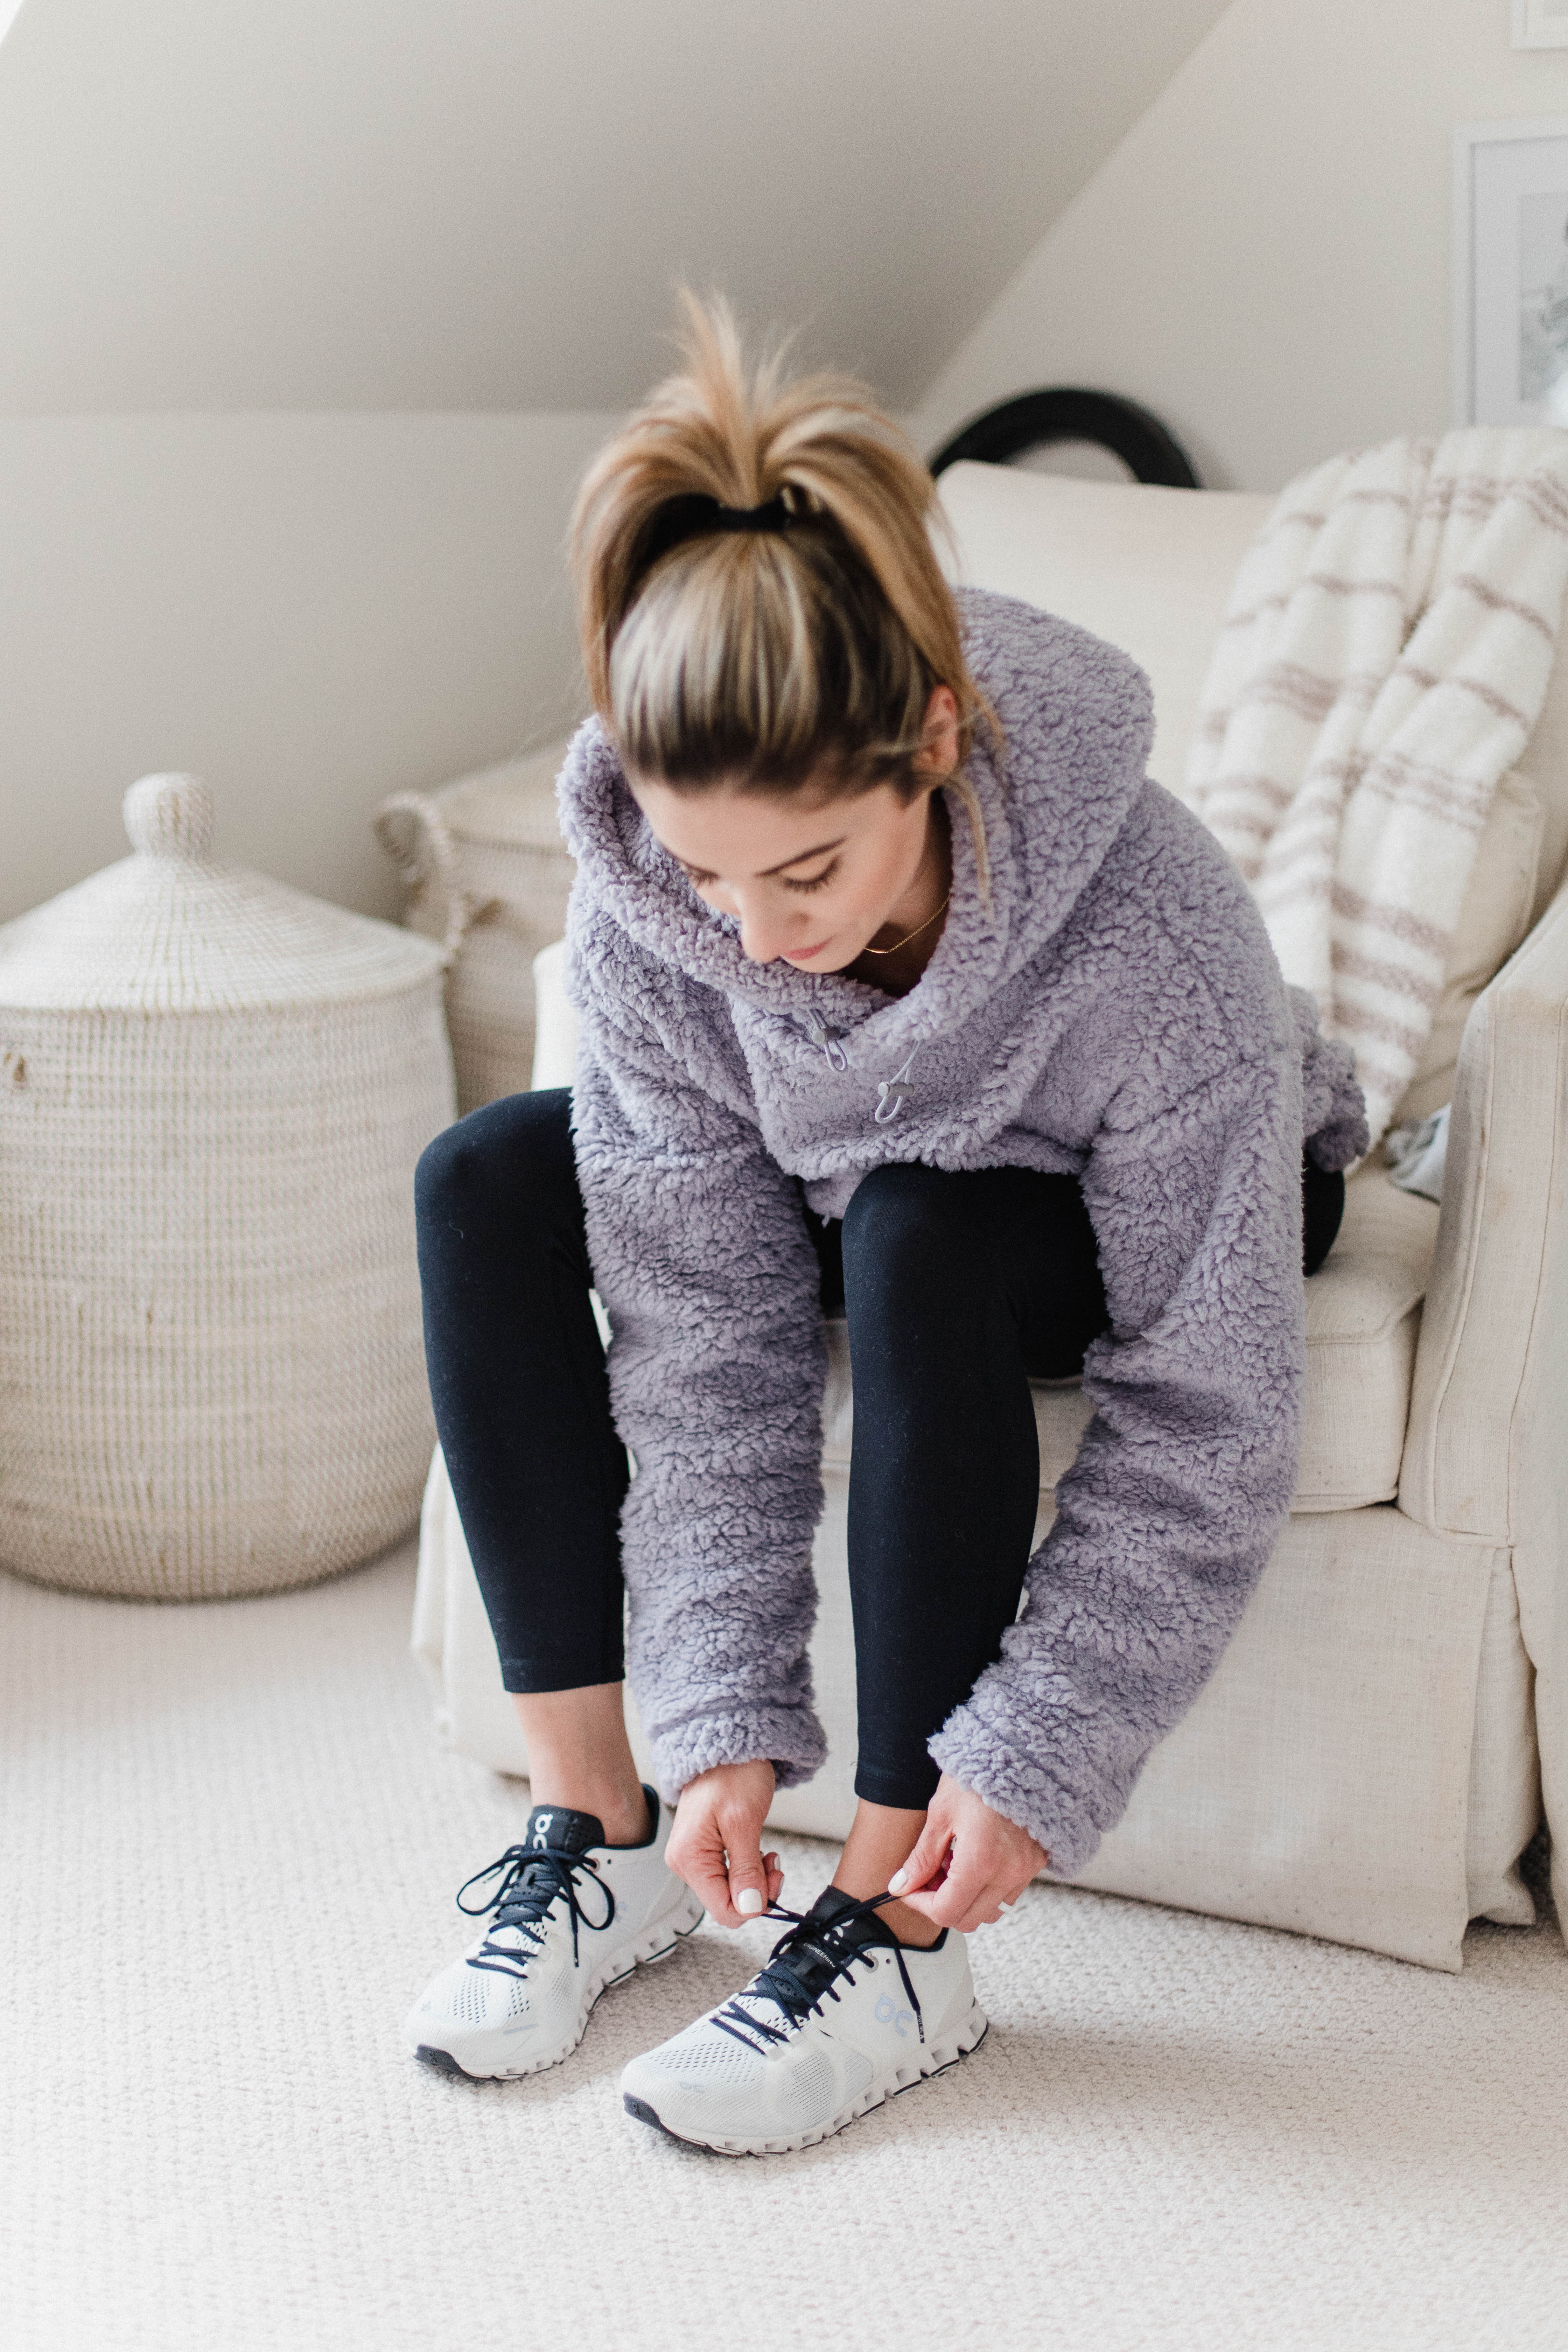 Connecticut life and style blogger Lauren McBride shares her goals for 2020, featuring athleticwear from Nordstrom.